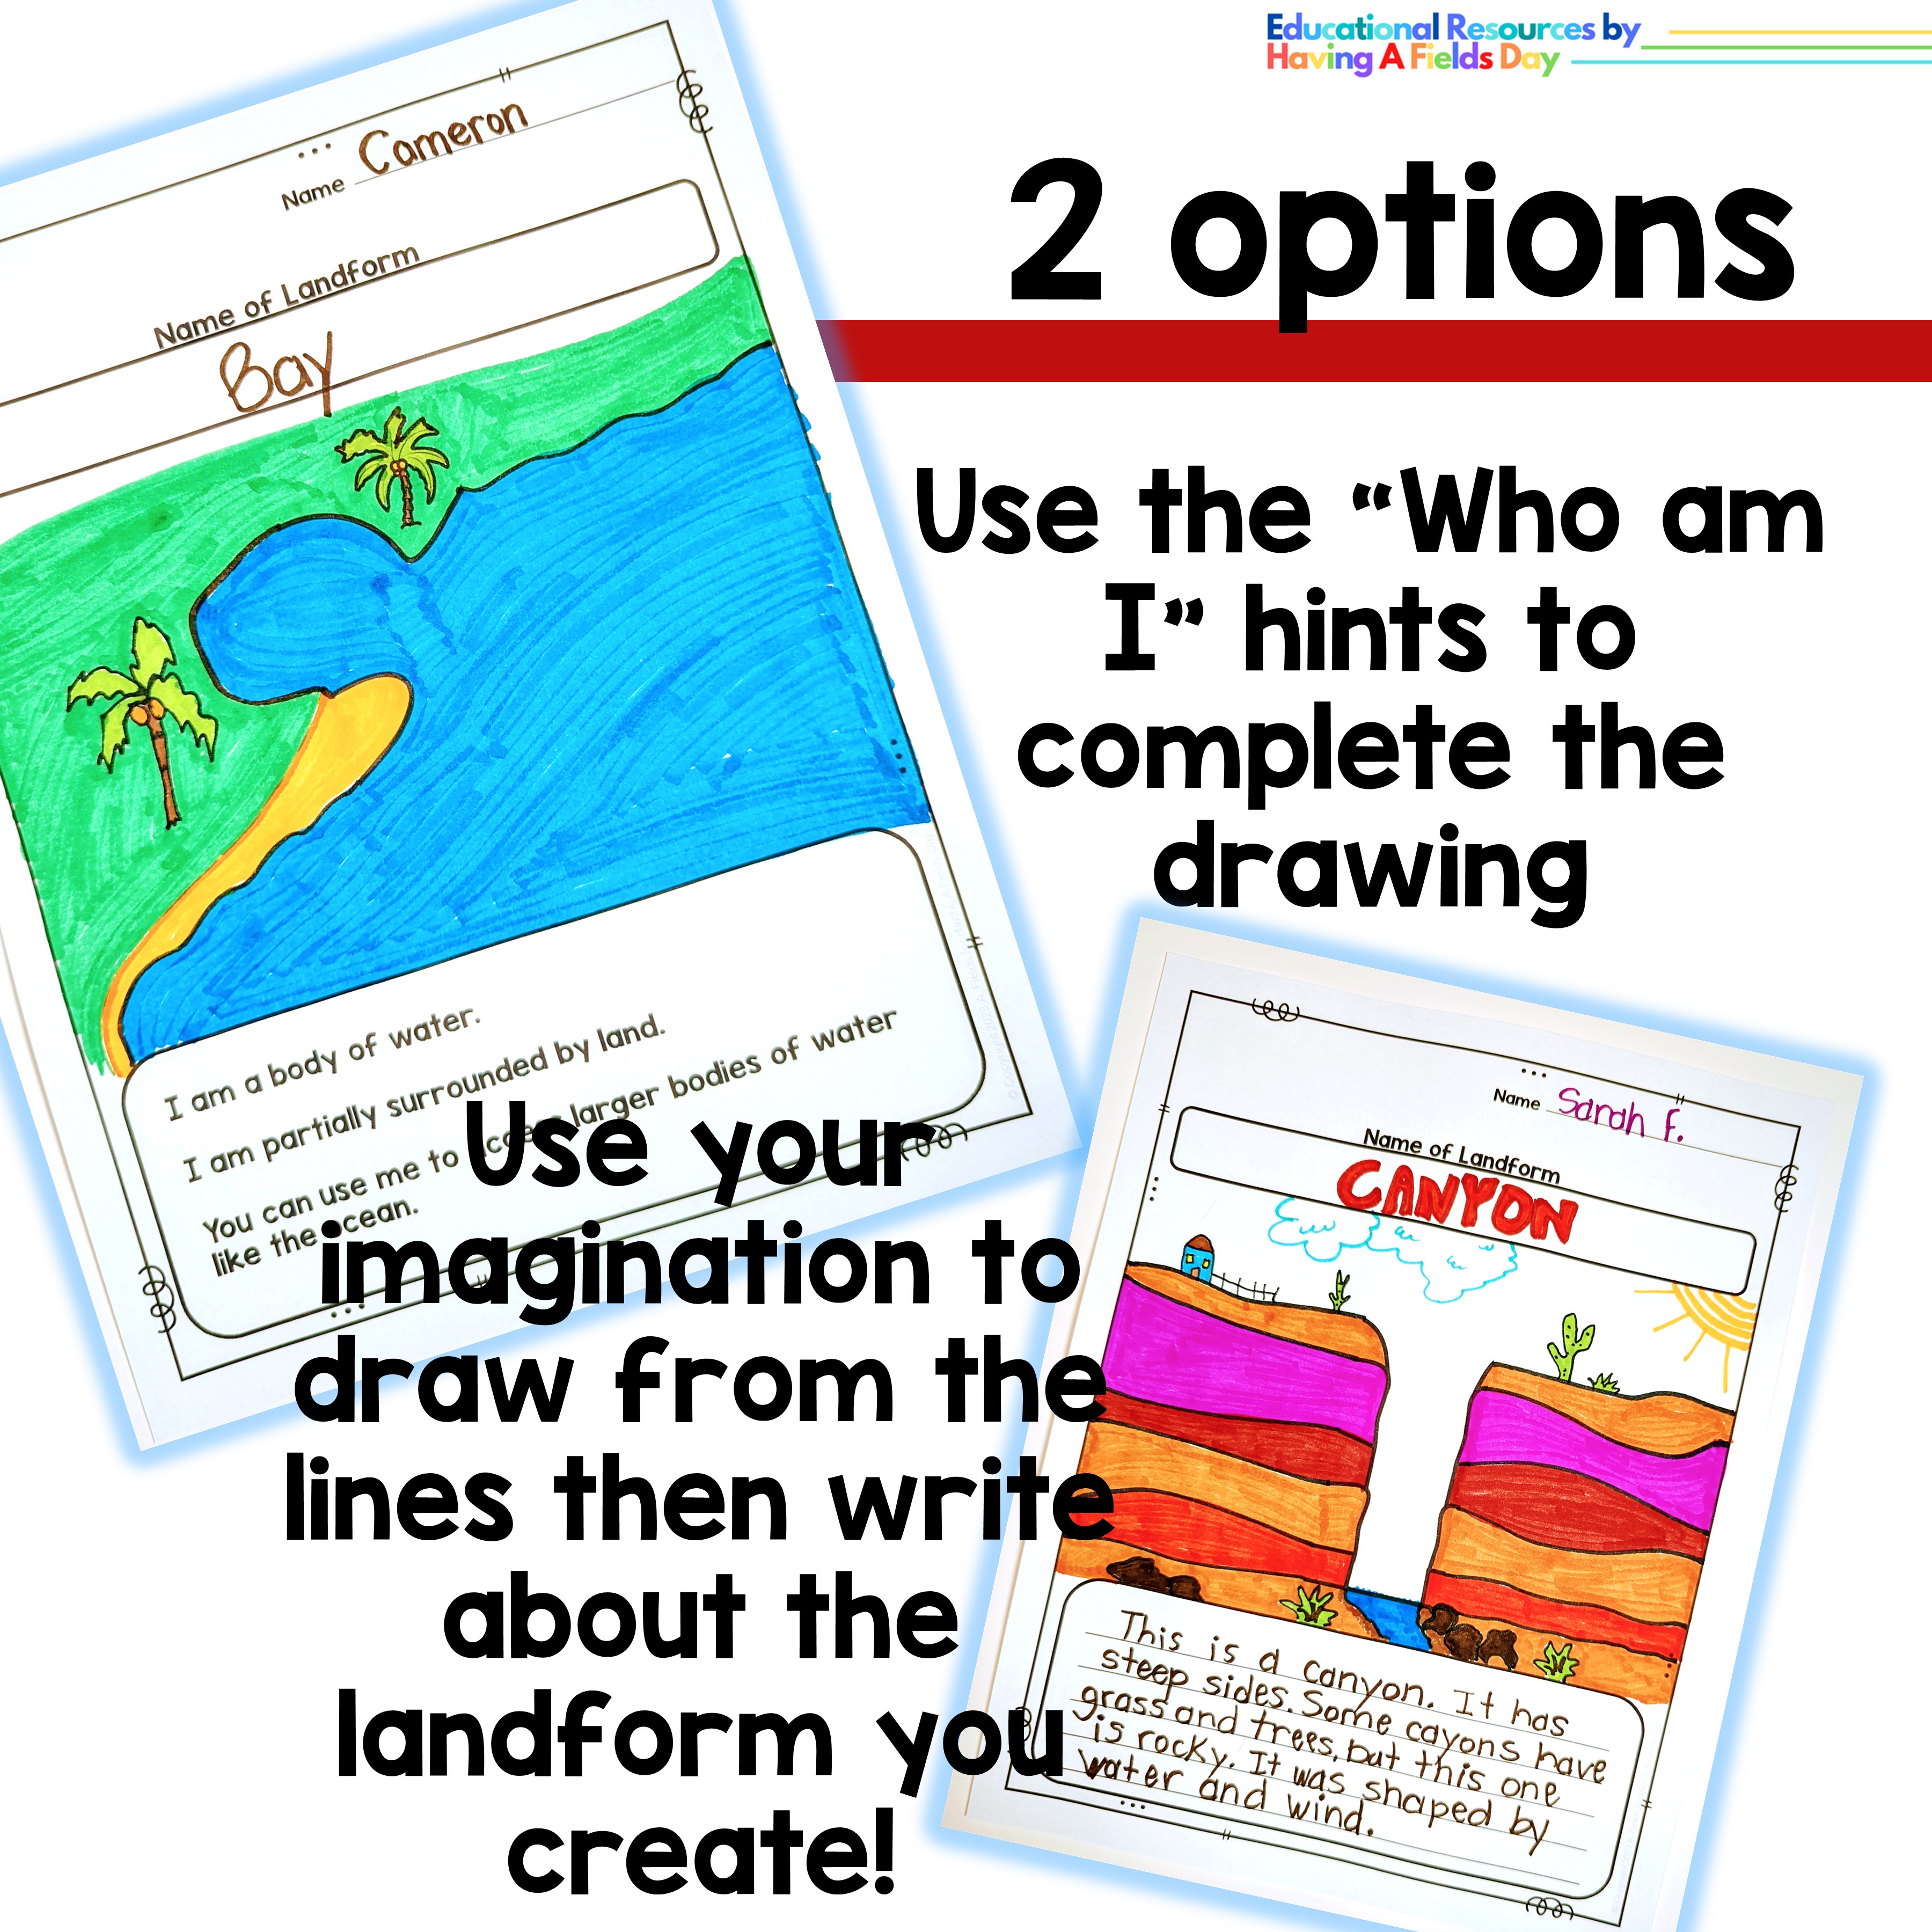 Oasis Drawing Landform For Free Download - Landforms Drawing | Geography  worksheets, Landforms posters, Geography